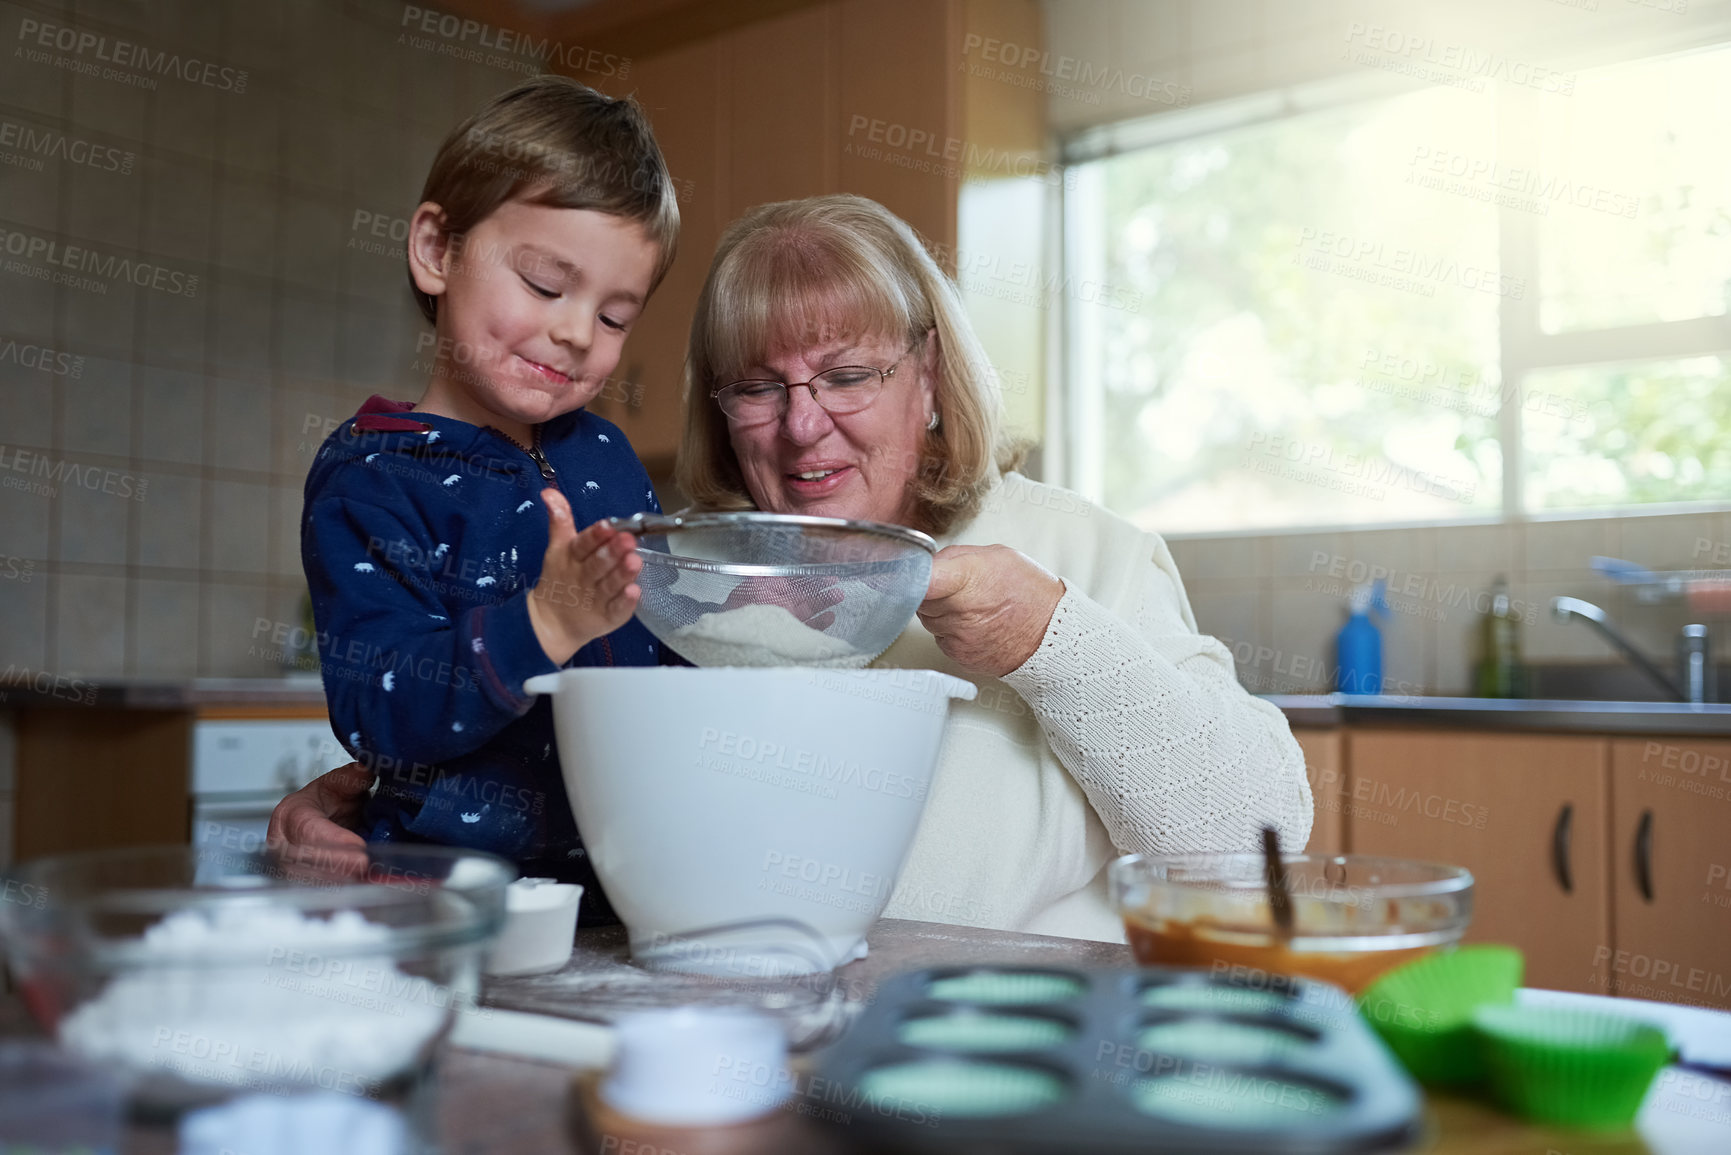 Buy stock photo Cropped shot of a woman baking with her grandson at home